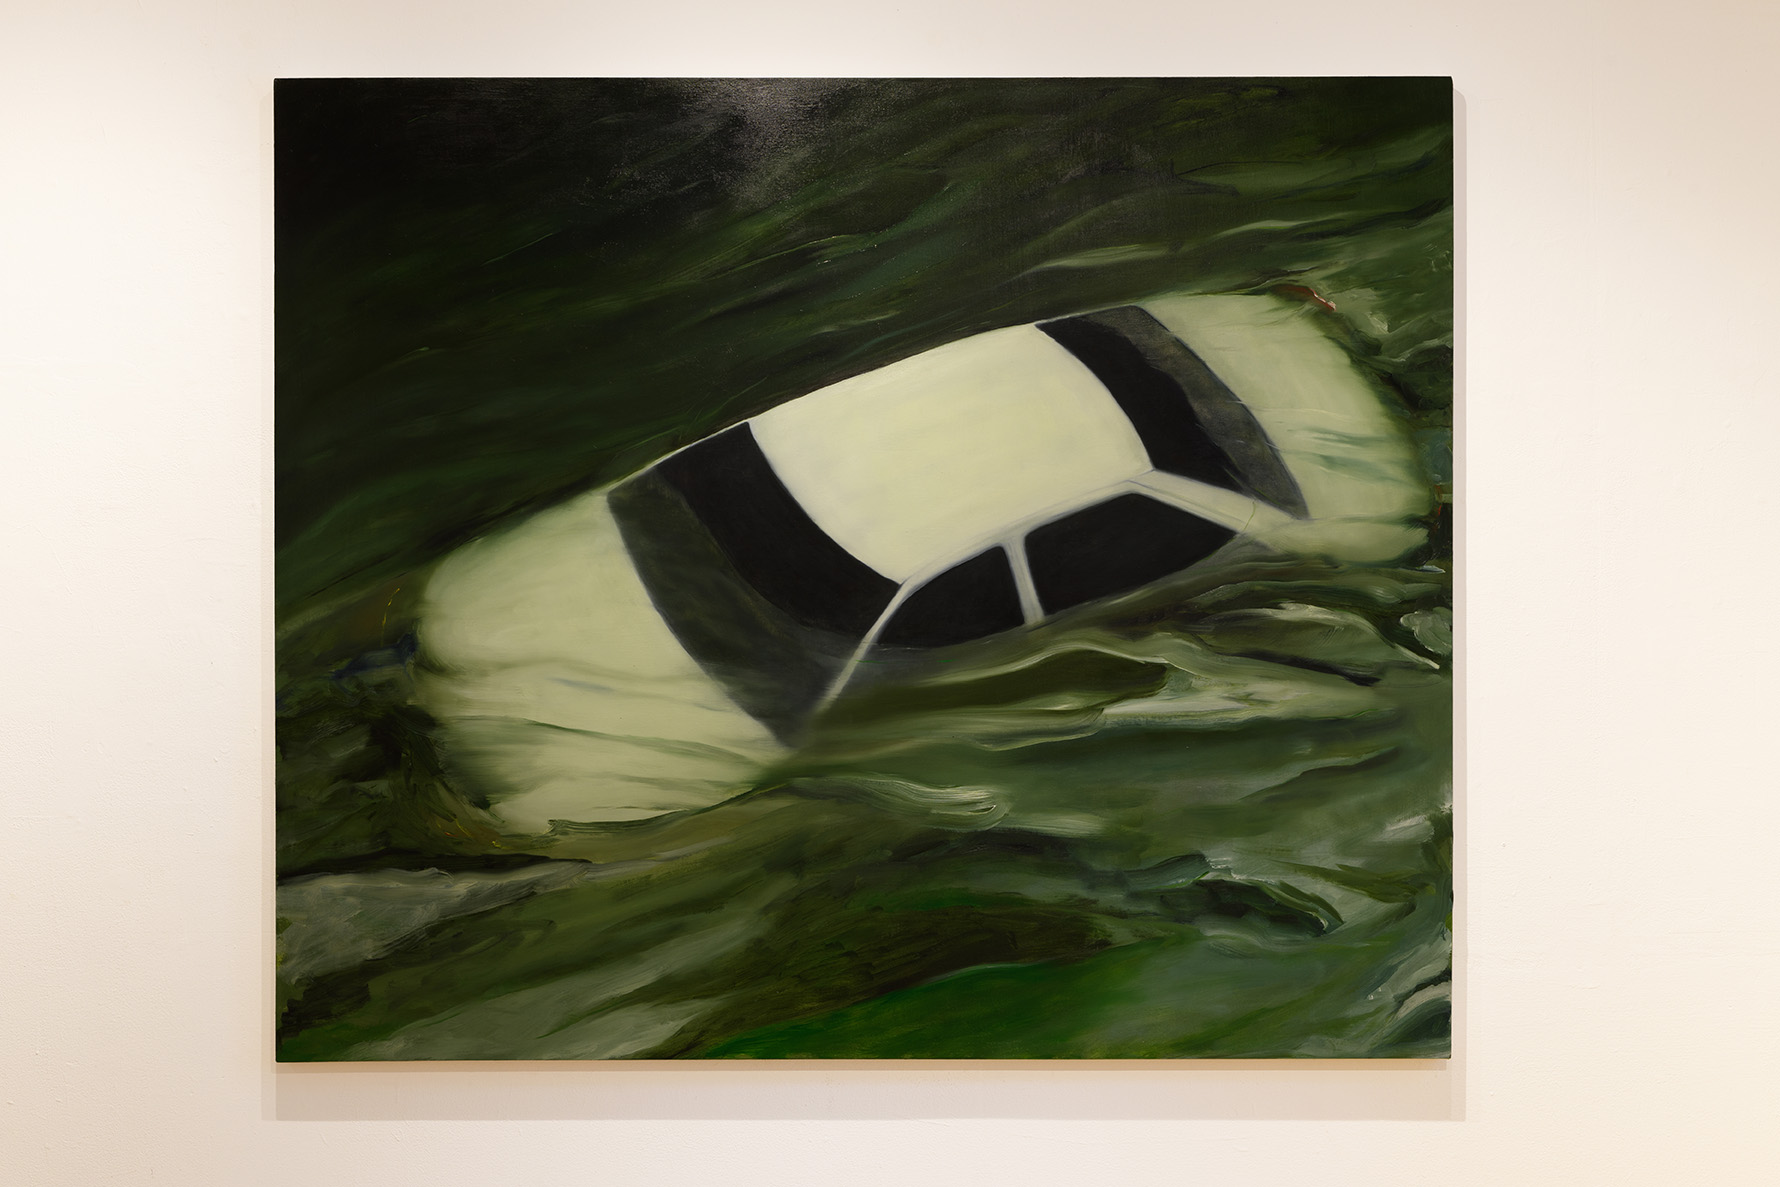 [A painting of a car submerged in dark swampy water. Rich hughes of moss, soot and ivory show a white car submerged in turbulent green water. Night has fallen. The hood of the car is white and the windows are pitch black. On close inspection slivers of red and amber indicate that the car is still on, its head and tail lights transmitting a faint glow through the murky river.]